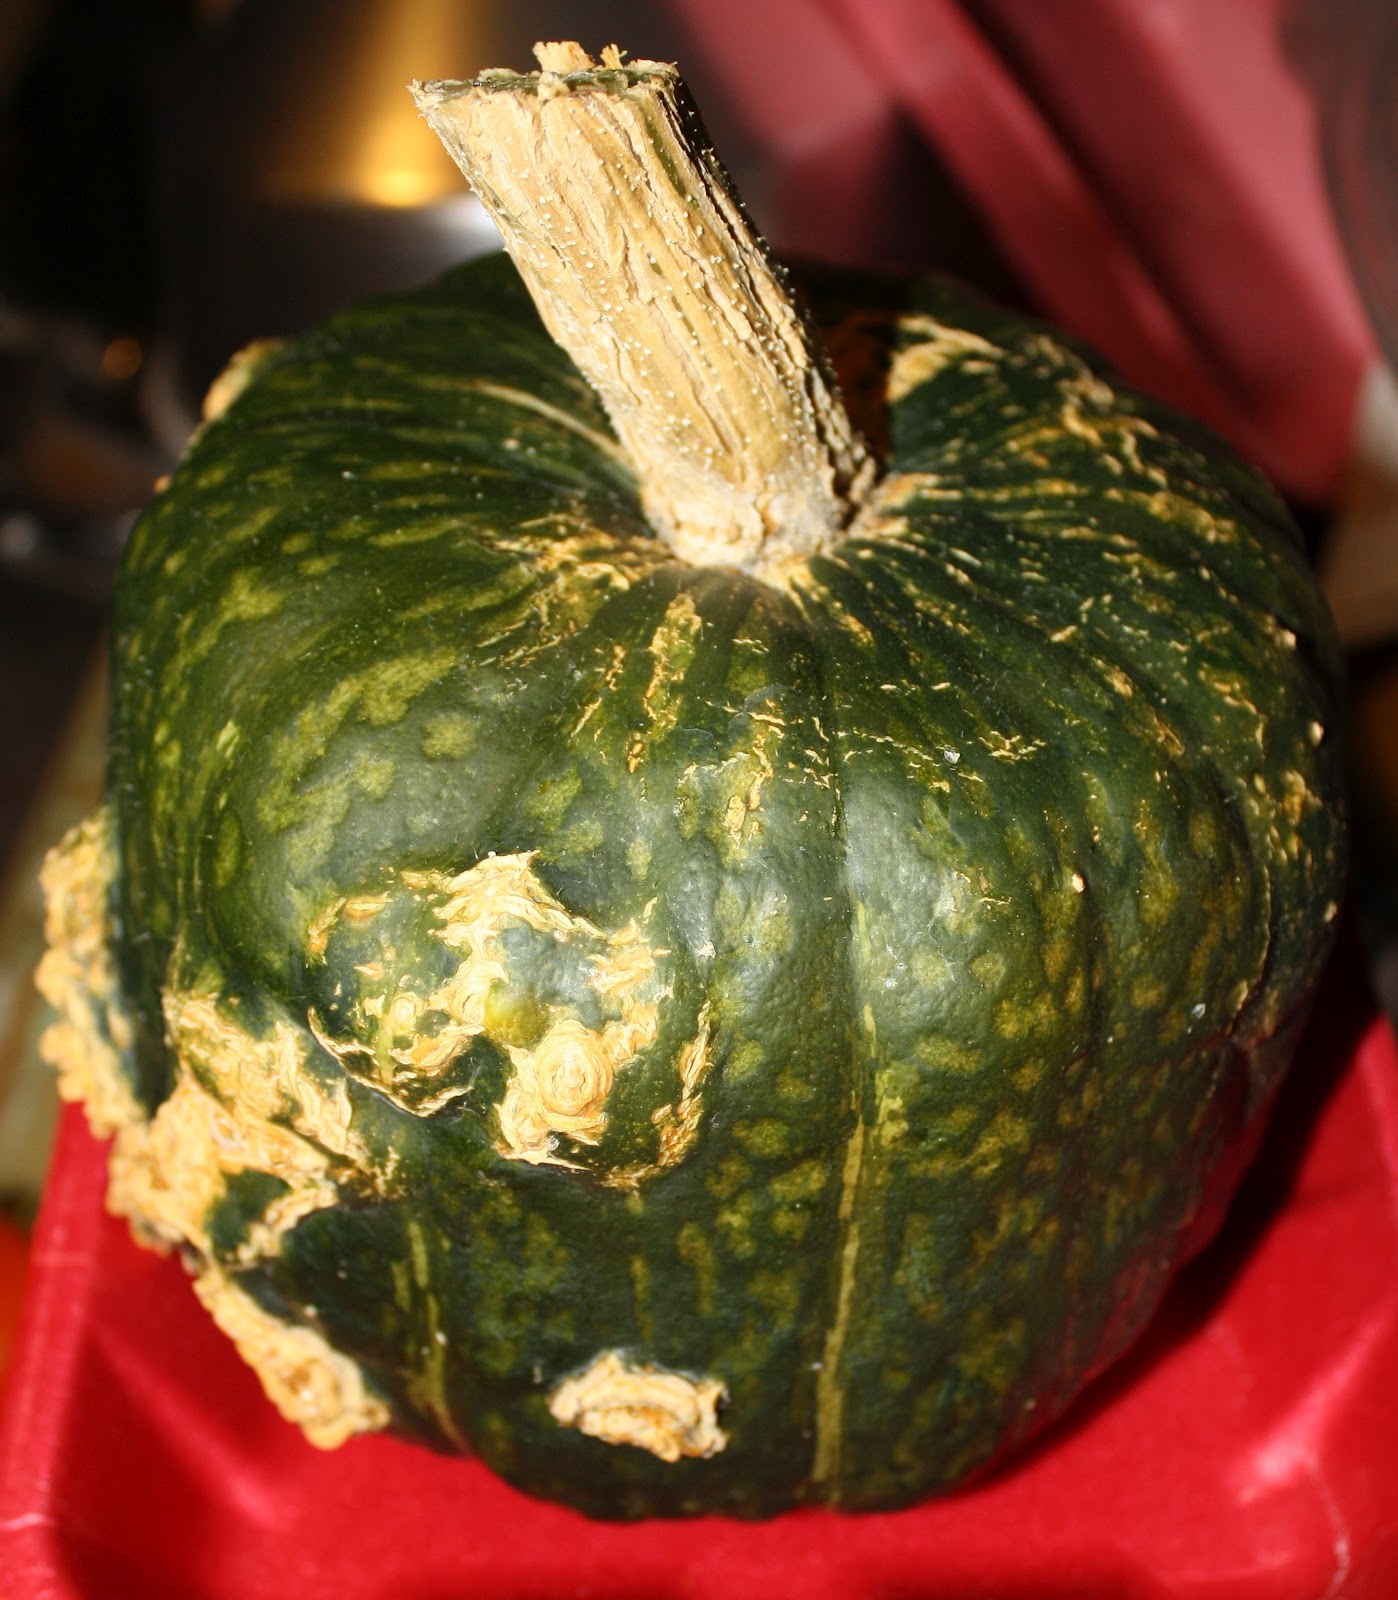 Collection 92+ Pictures Pictures Of Ripe Buttercup Squash Superb